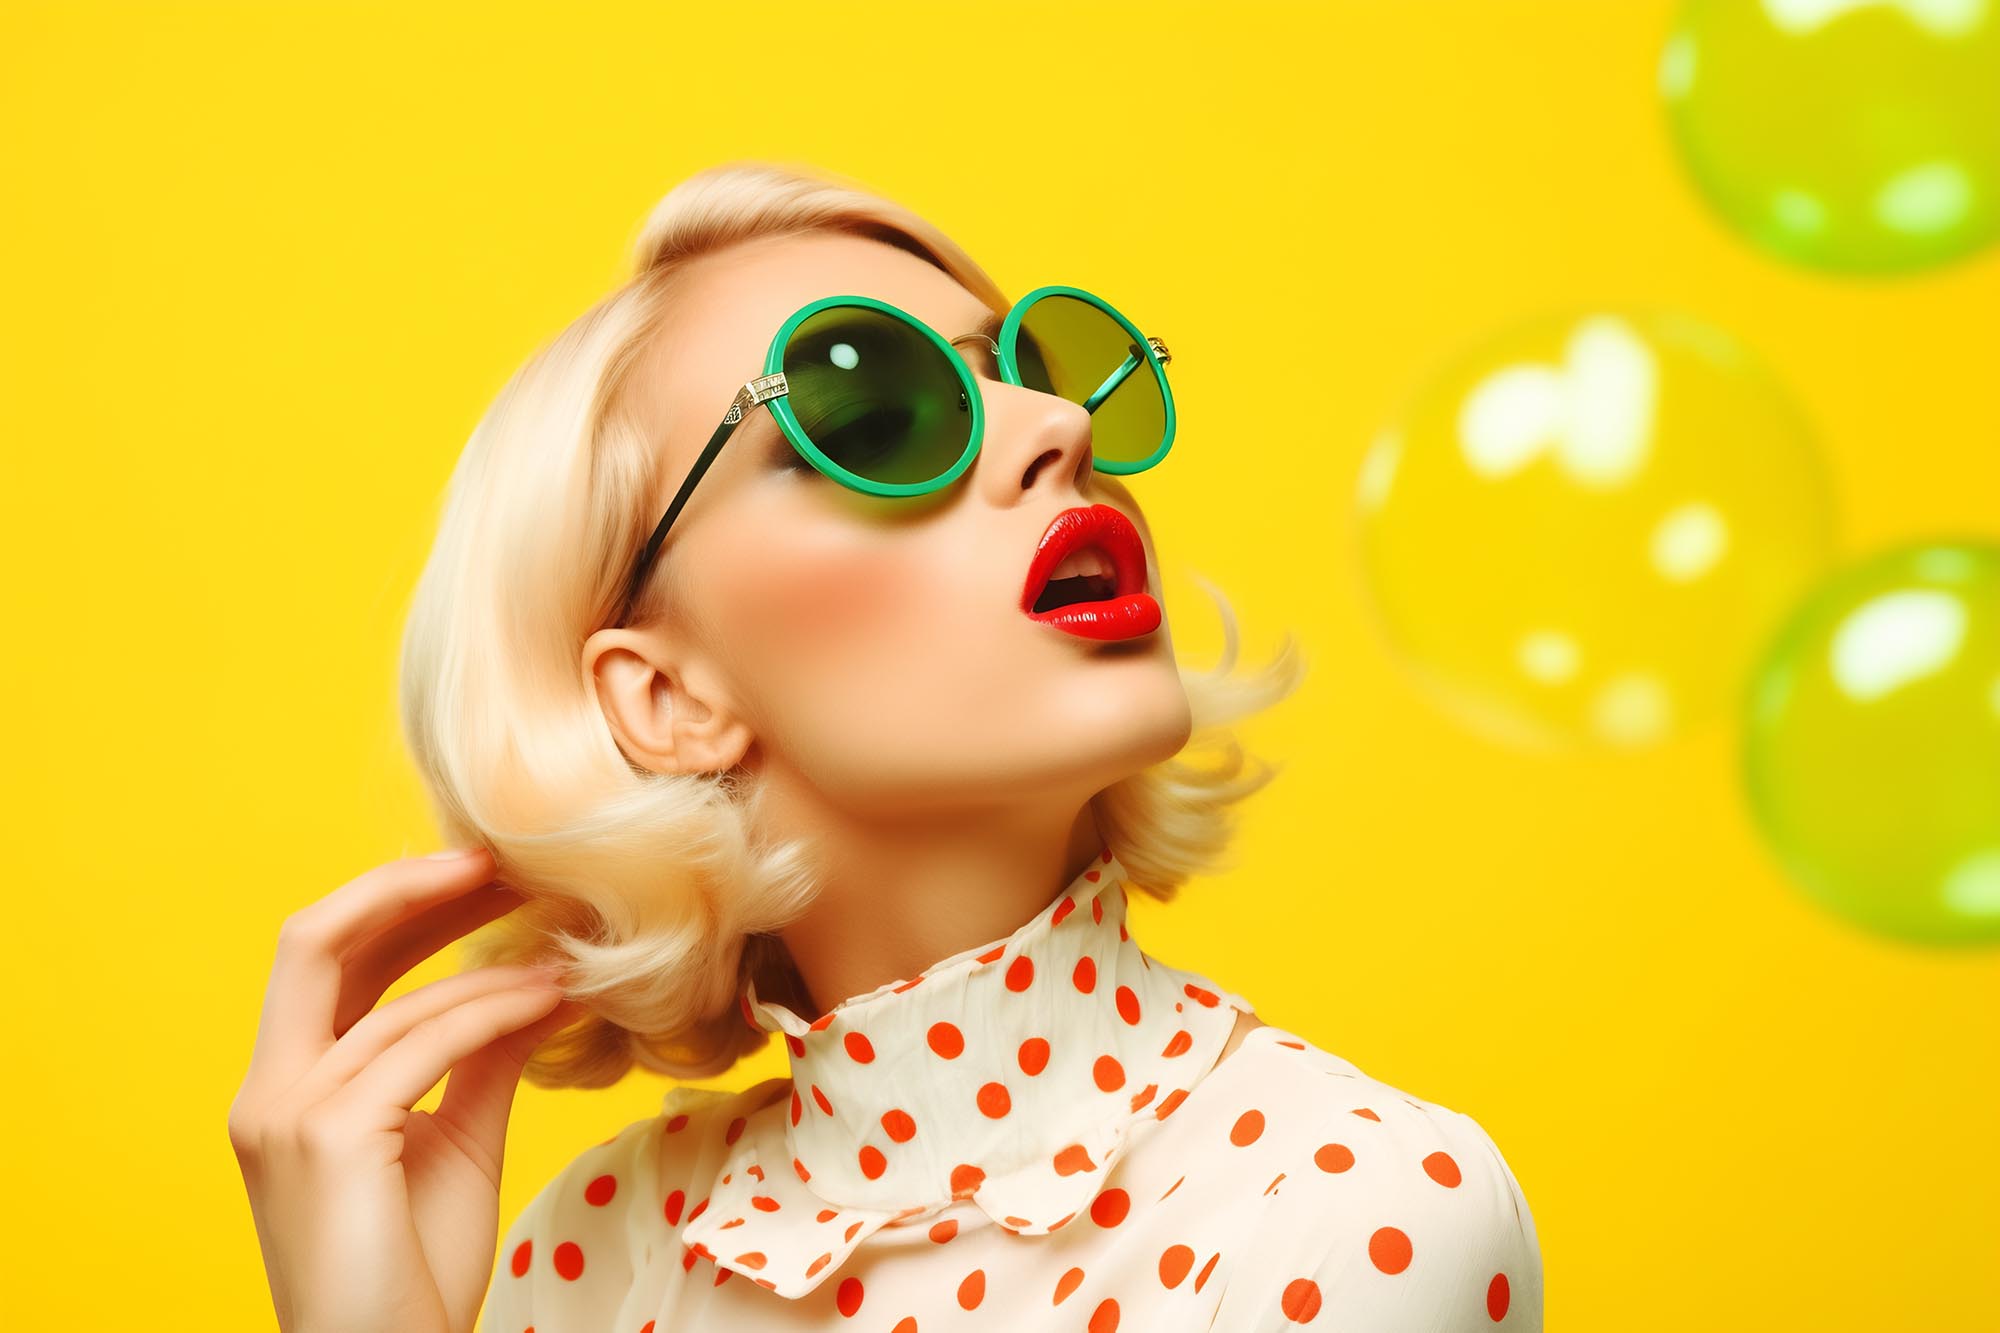 Close up fashion studio photo of an elegant blond woman in trendy red lipstick on yellow background. Vibrant colors